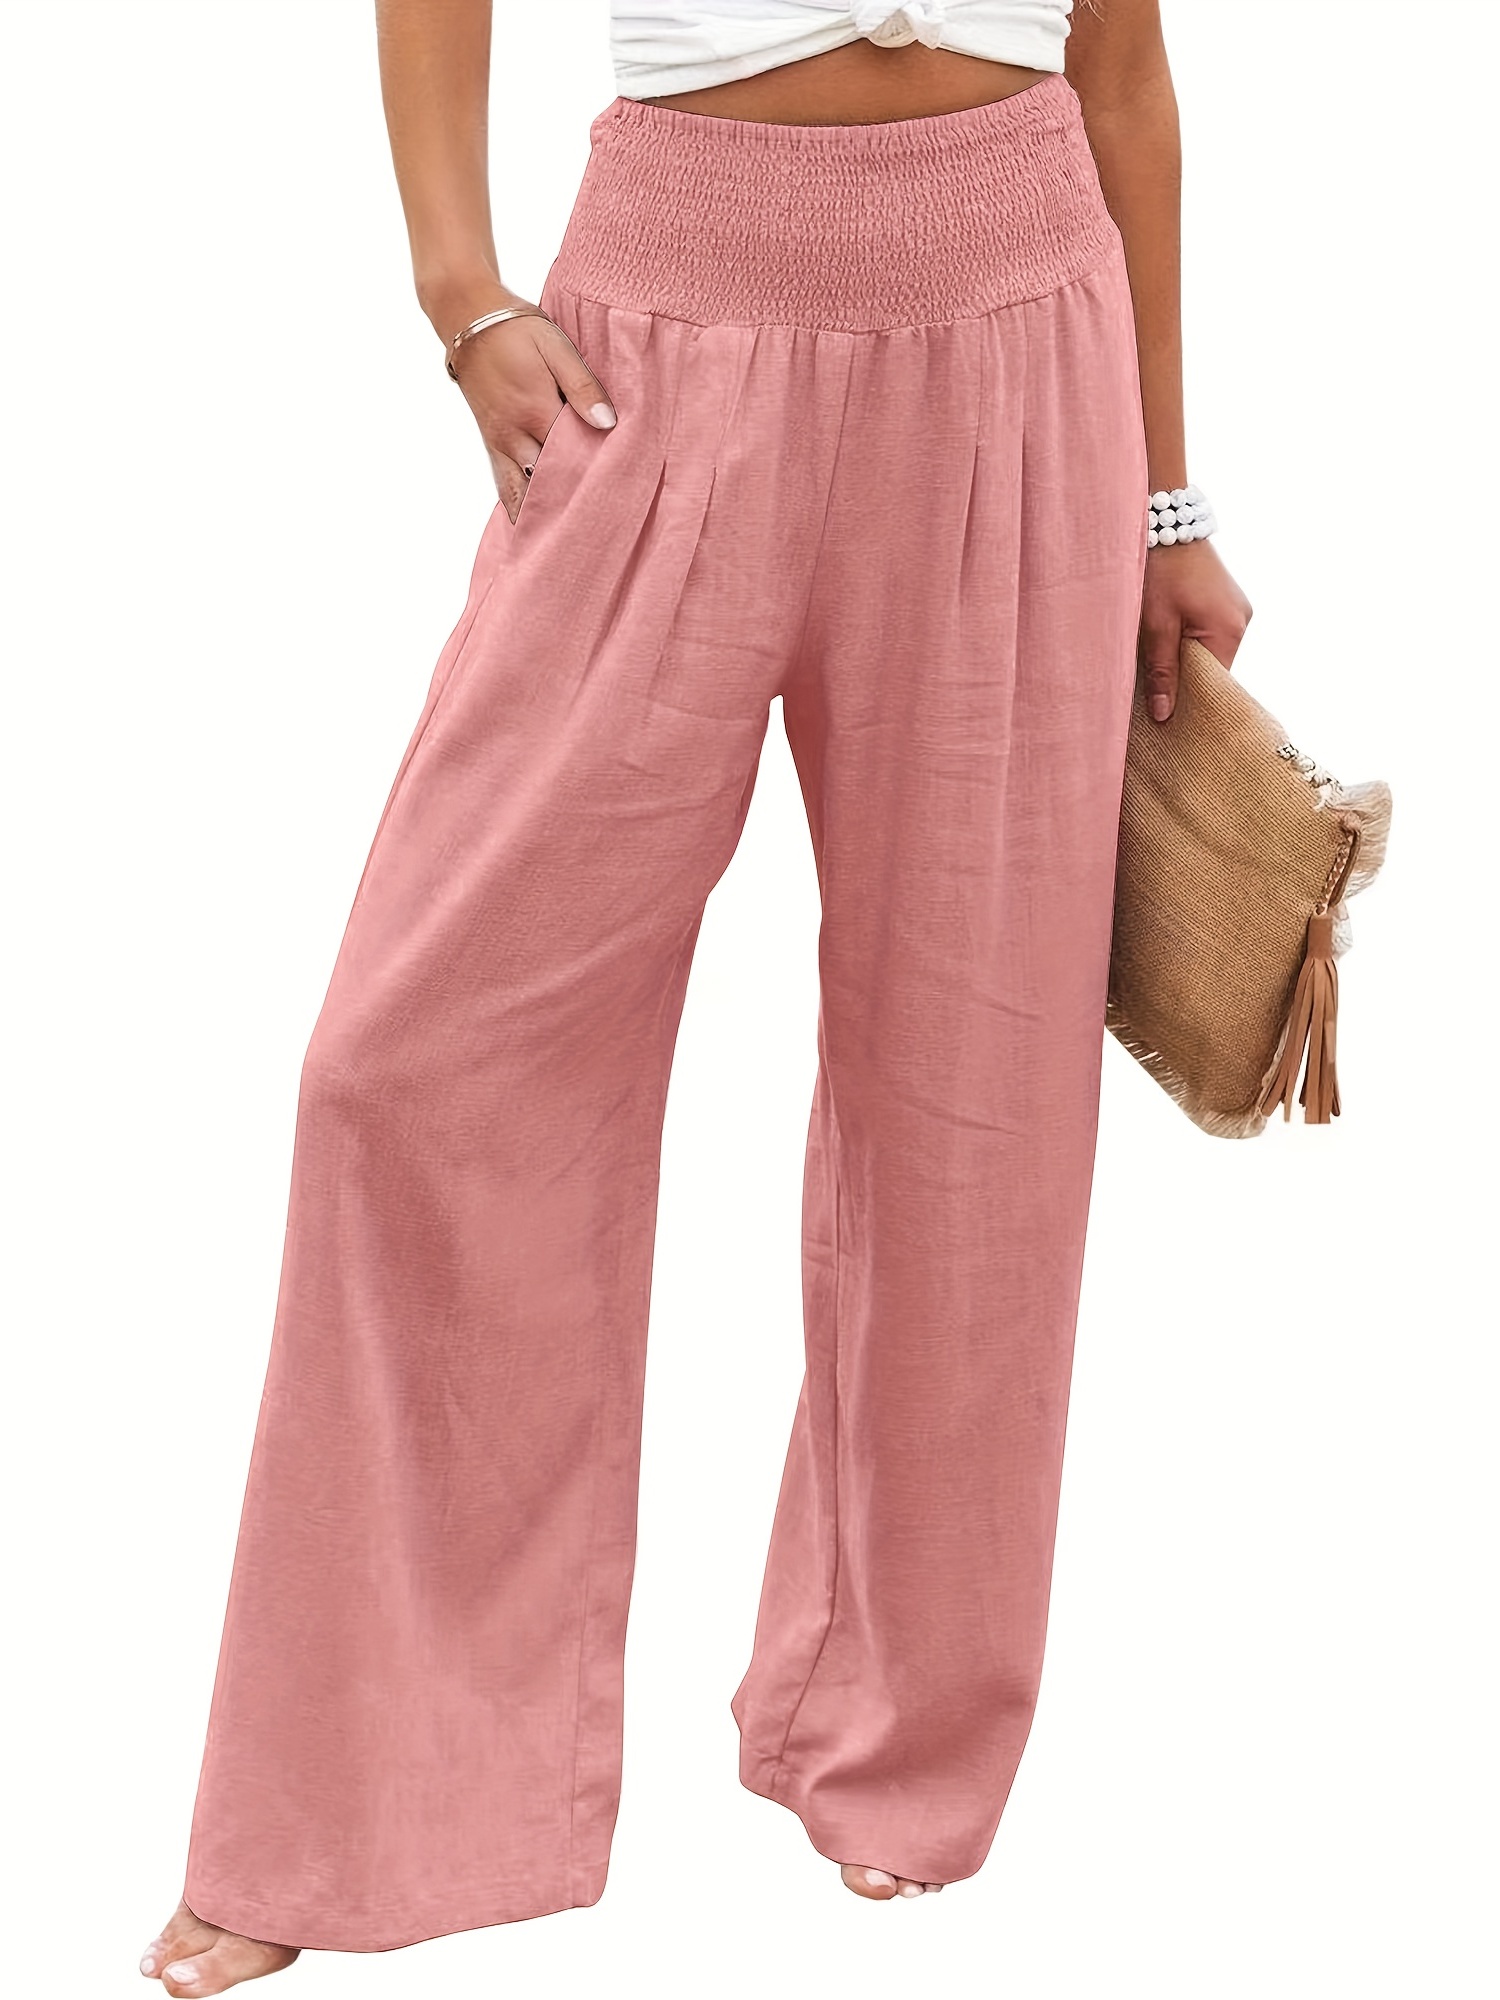 DUSHU Simple Style Wide Leg Pants Women Autumn High Waist Slim Casual Solid  Color Available in Length and Short Female Trousers